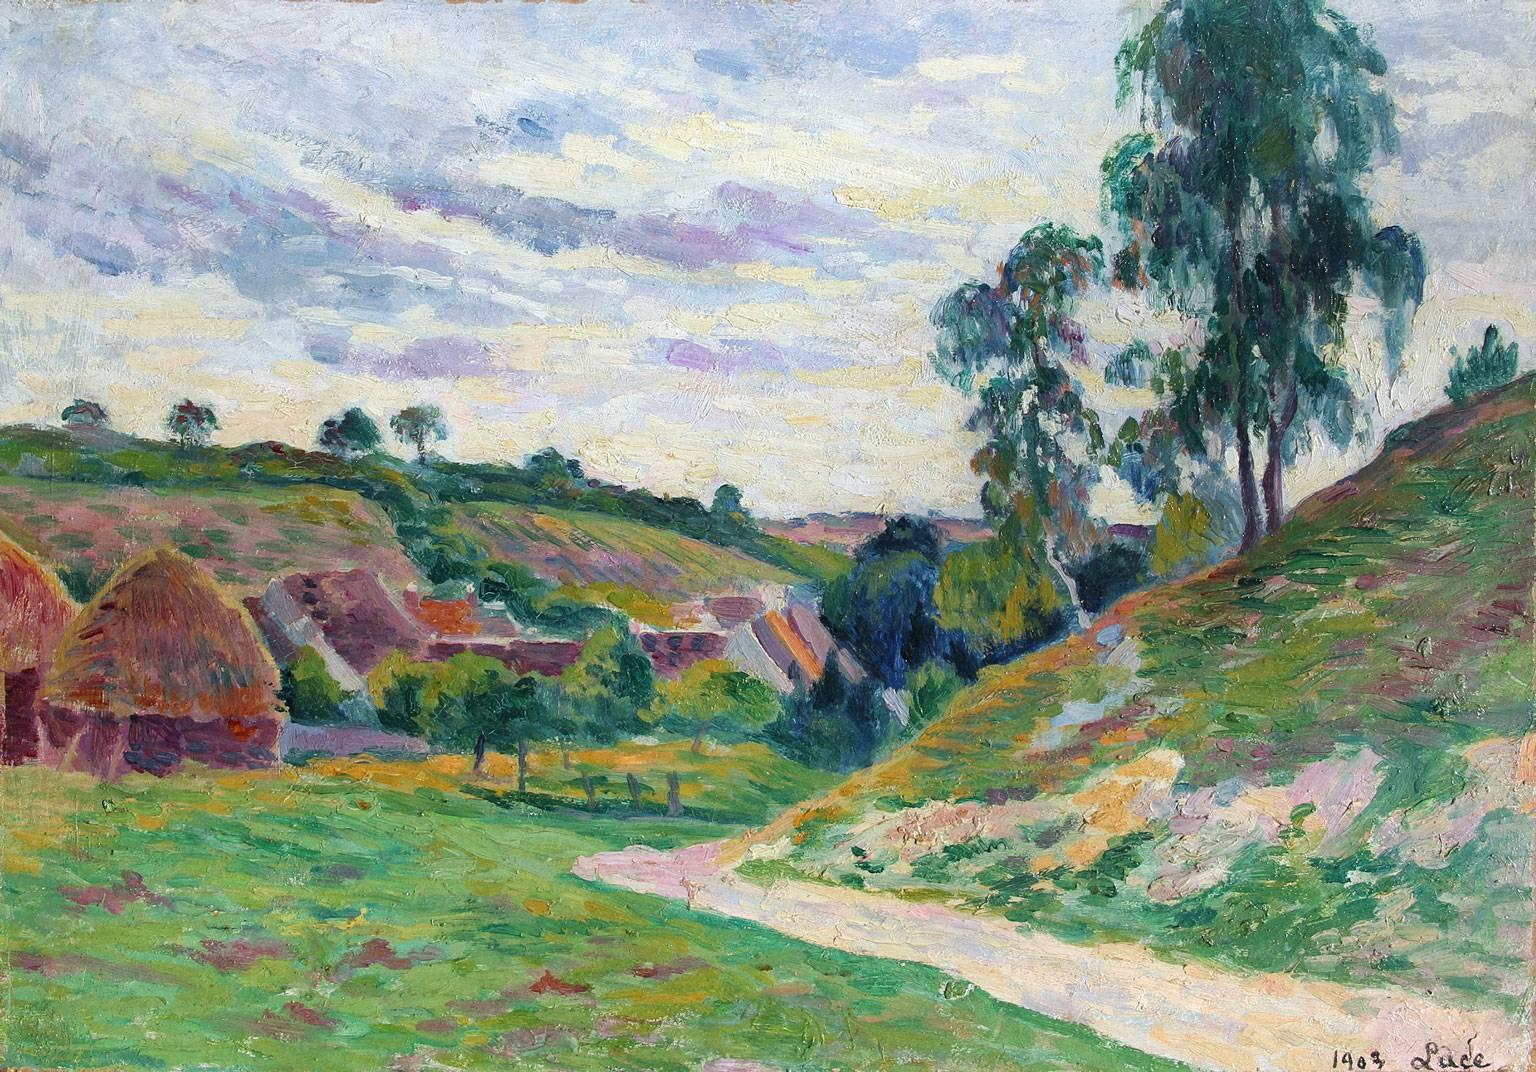 MAXIMILIEN LUCE
French, 1858–1941

Les Meules aux Environs de Moulineux

Signed and dated 1903 Luce
Oil on board
12½ x 18 inches (32 x 46 cm)
Framed: 18½ x 24 inches (47 x 61 cm)

This work will be included in Volume 4 of Denise Bazetoux's